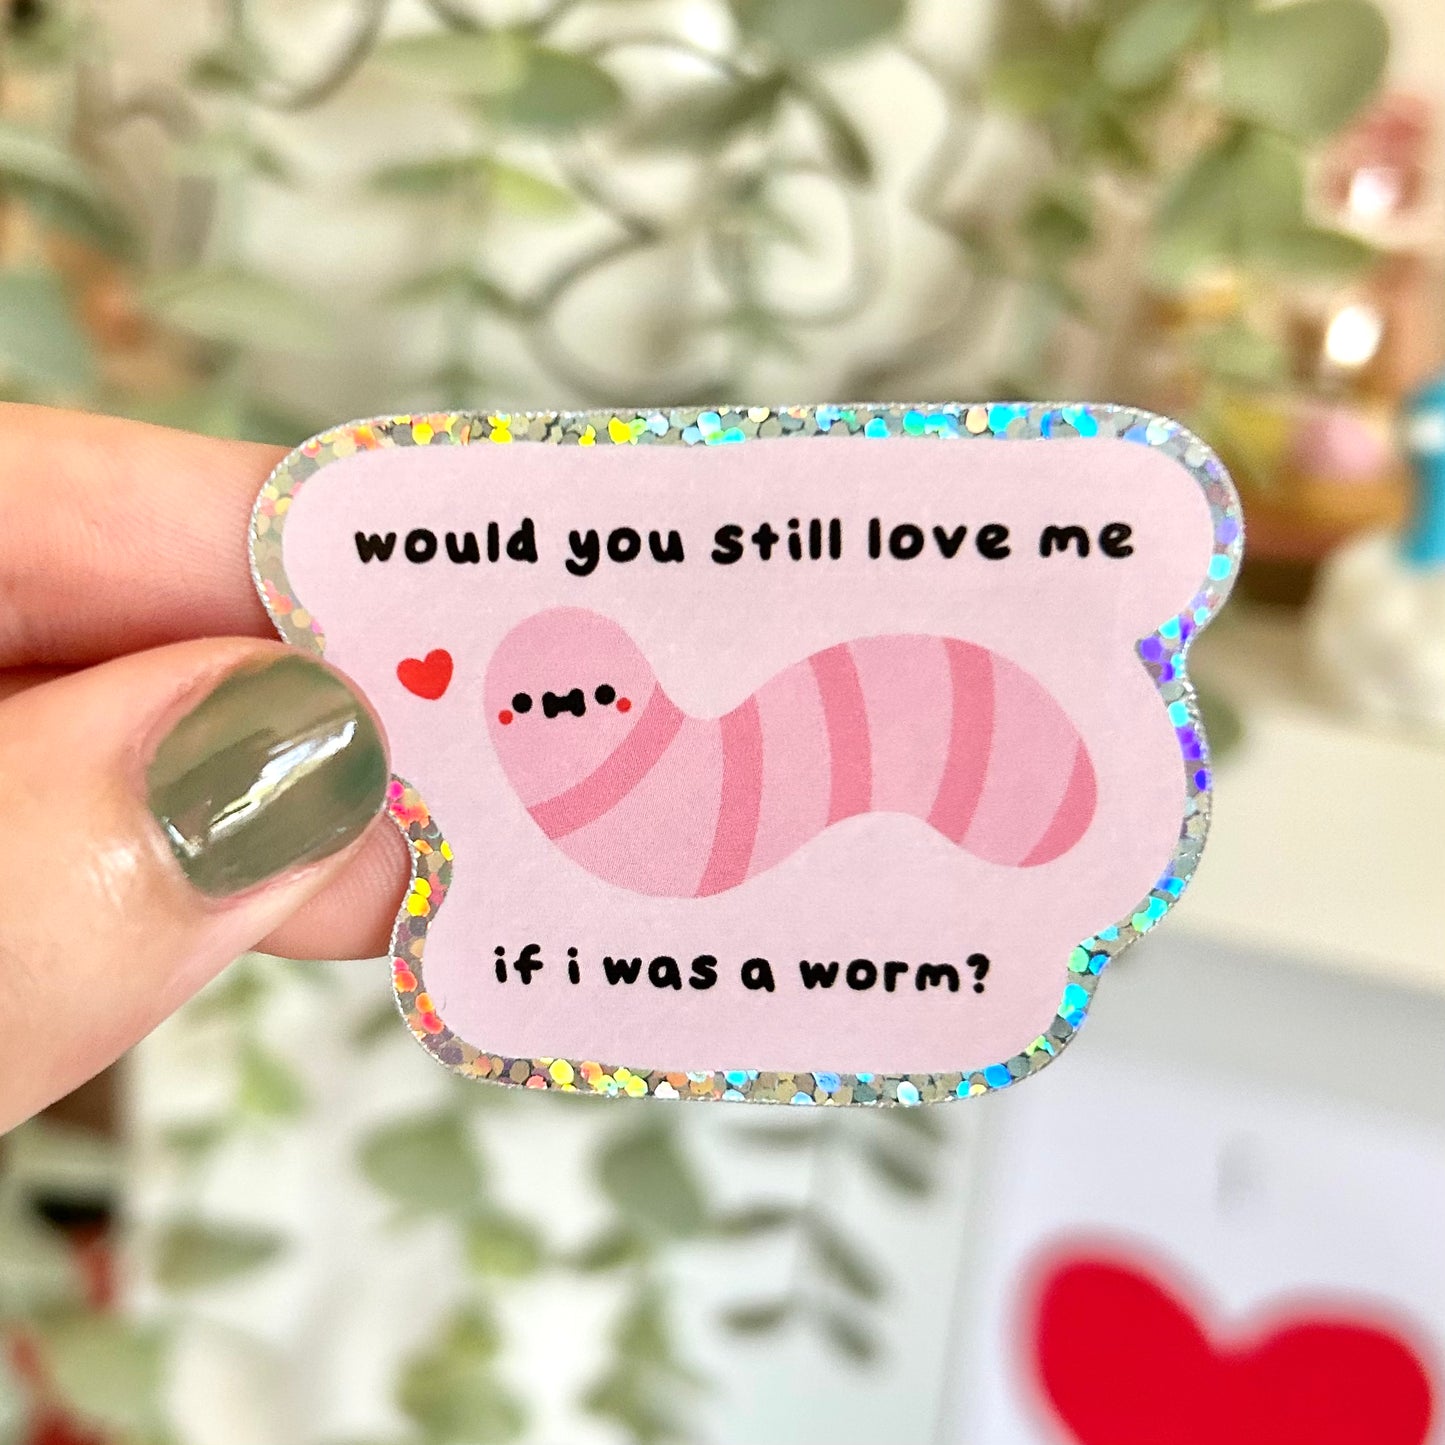 “Would you still love me if I was a worm?” Sticker